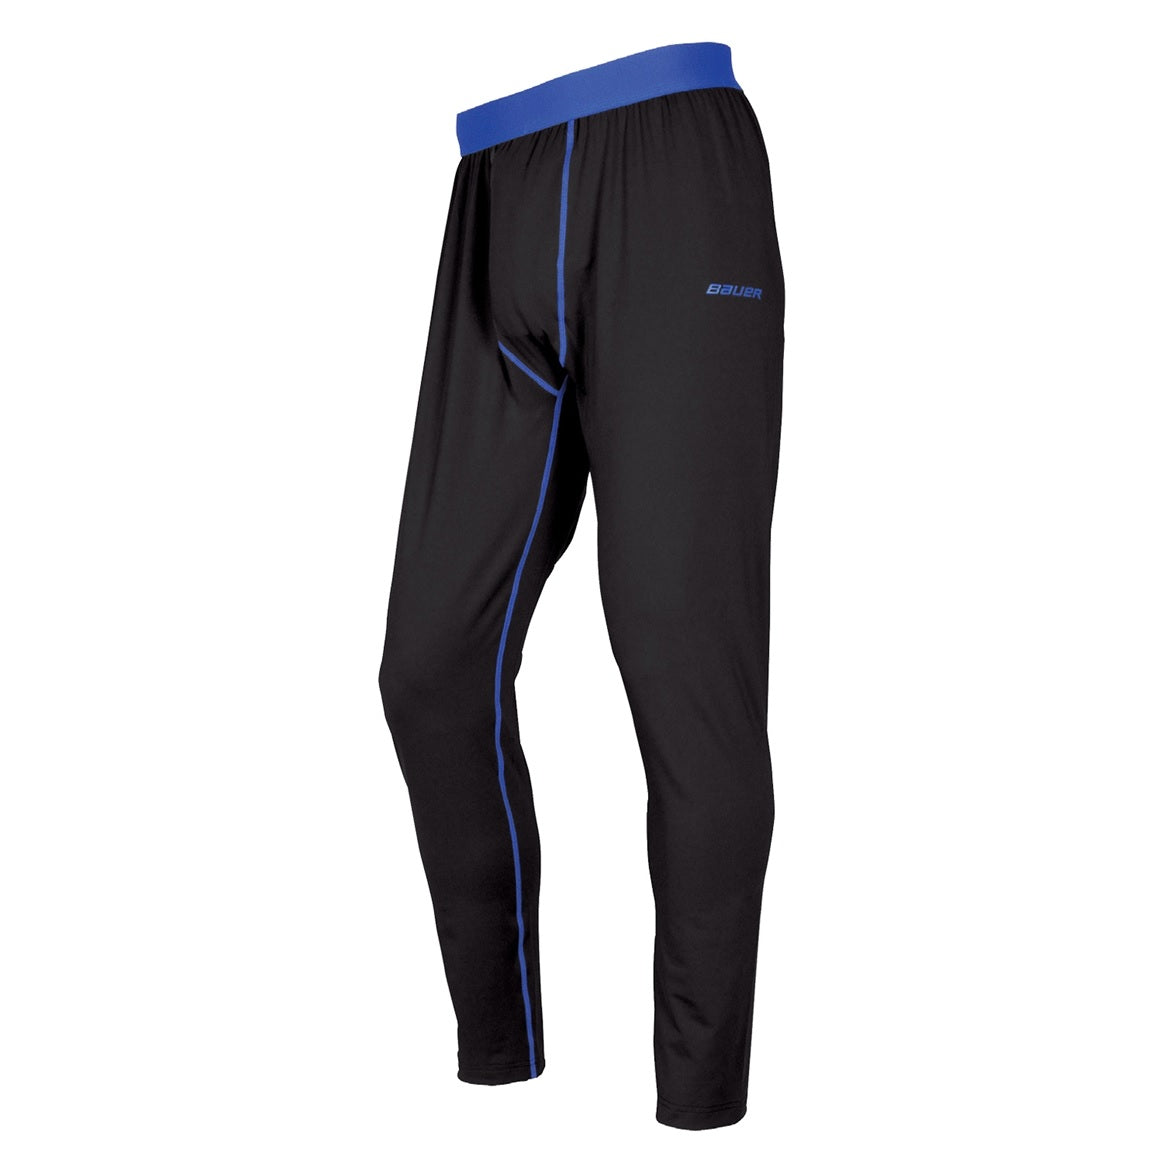 Bauer NG sweat suit bottom LS base layer underwear youth